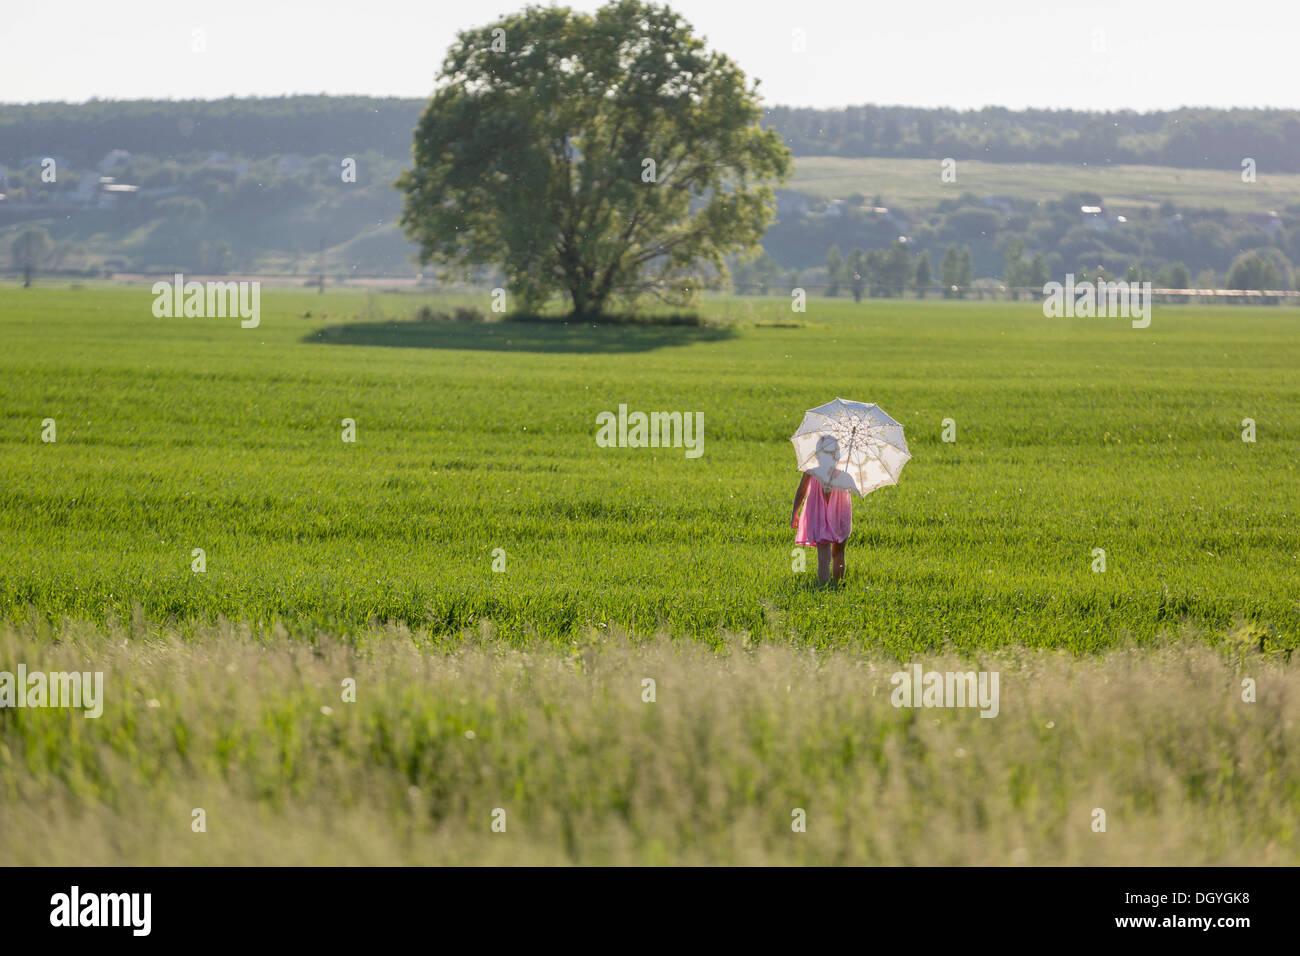 A young girl walking through a field using an umbrella as protection against the sun Stock Photo